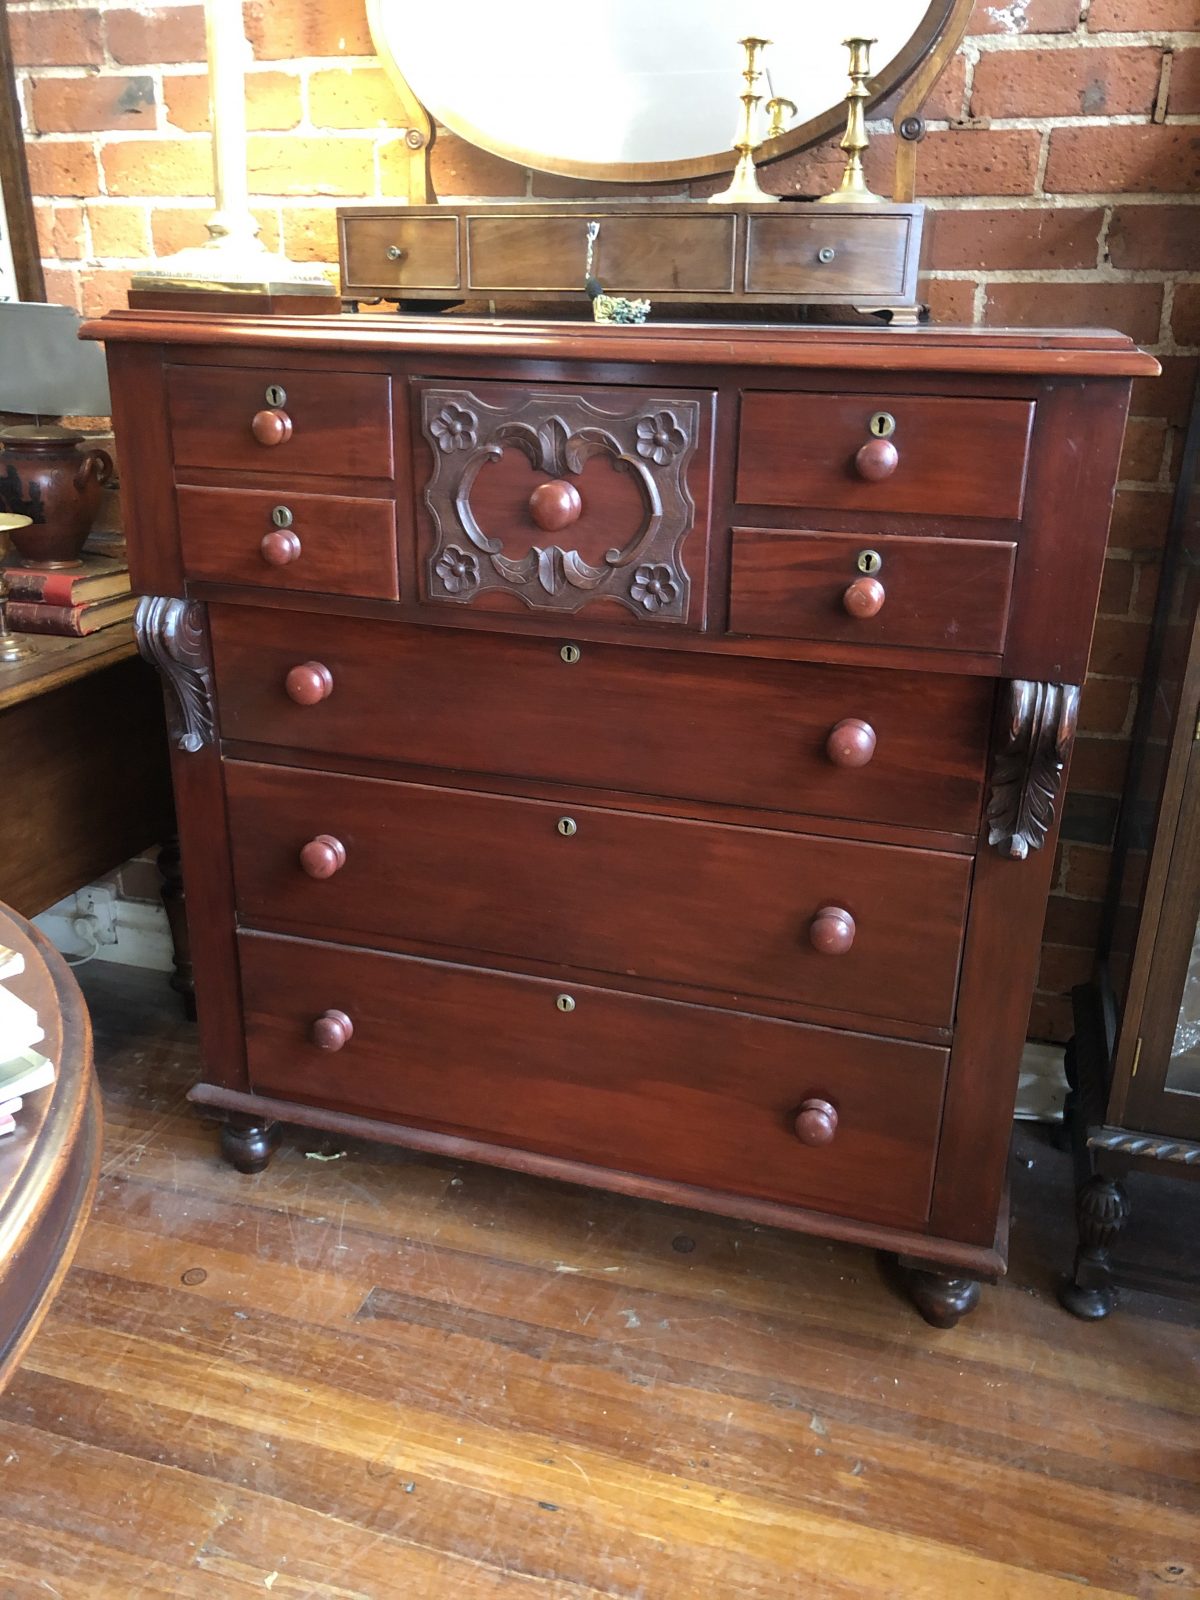 197. Colonial Chest of Drawers